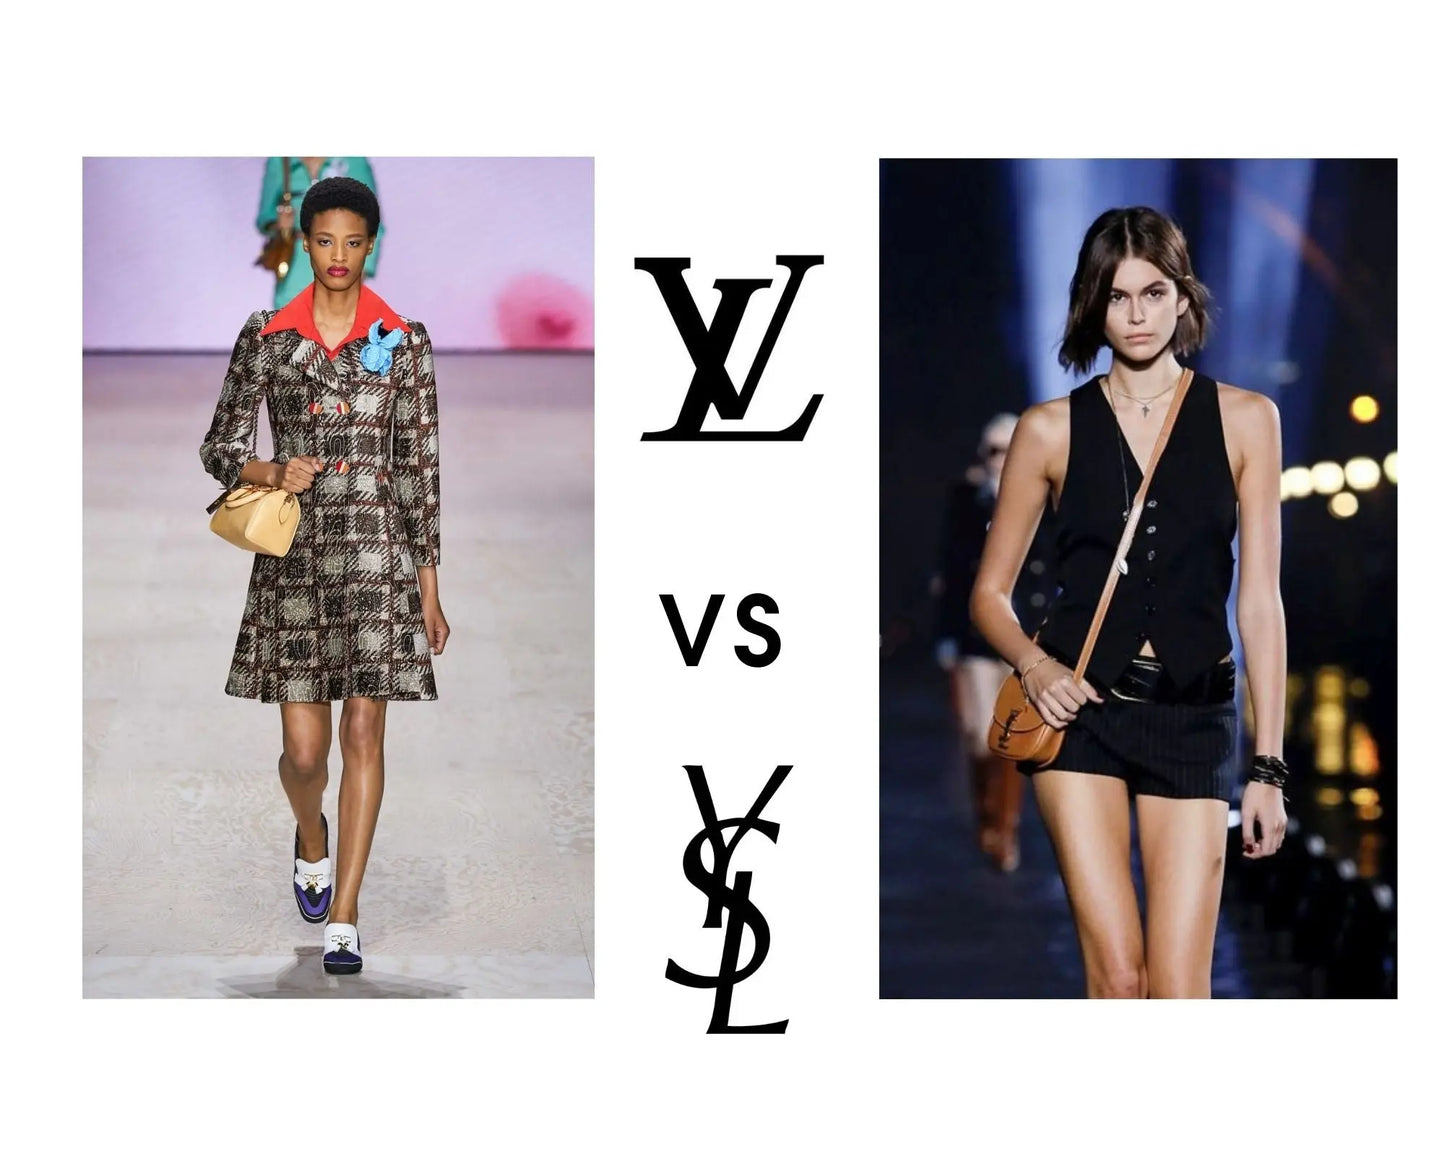 Vuitton & Saint Laurent were Celebs' Brands of Choice in the Days